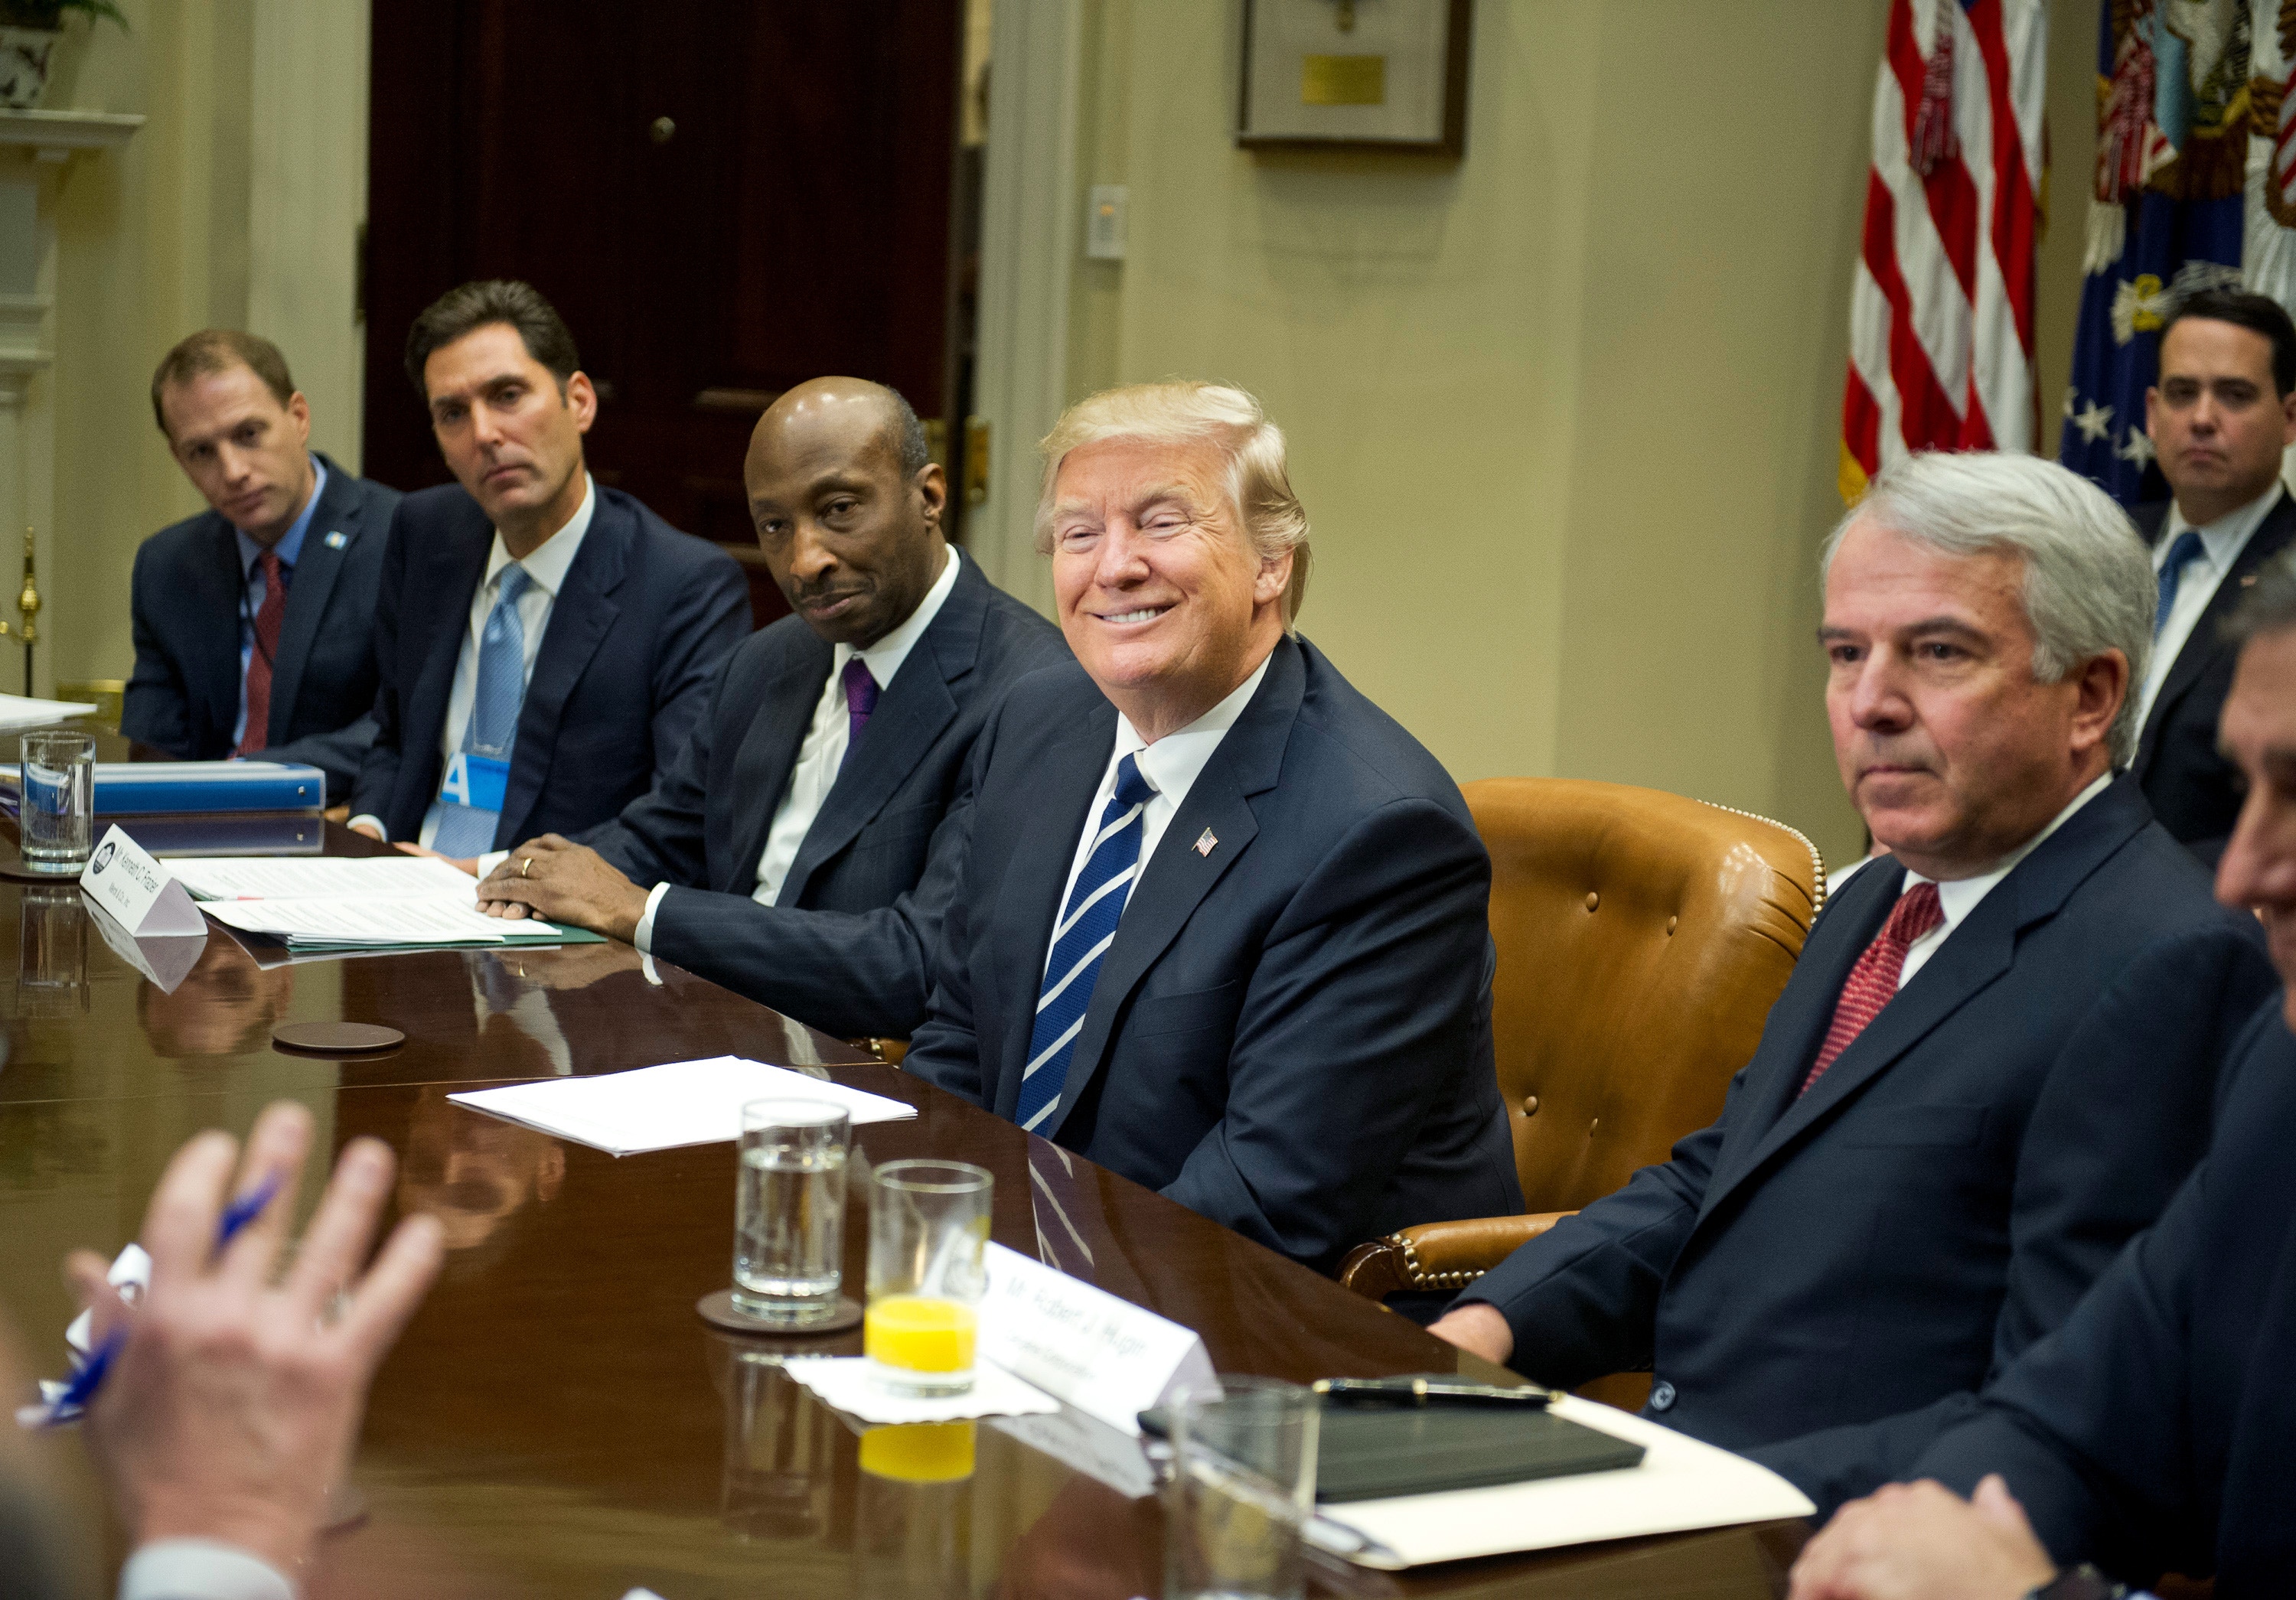 WASHINGTON, DC - JANUARY 31: (AFP OUT) U.S. President Donald Trump meets with representatives from PhRMA, the Pharmaceutical Research and Manufacturers of America, in the Roosevelt Room of the White House on January 31, 2017 in Washington, DC.  According to its website PhRMA "represents the countrys leading biopharmaceutical researchers and biotechnology companies."   From left to right: Josh Pitcock, Chief of Staff to the Vice President; Stephen Ubl, President and CEO, PhARMA; Kenneth C. Frazier, Chairman and CEO of Merck & Co; the President; and Robert J. Hugin, Executive Chairman, Celgene Corporation. (Photo by Ron Sachs - Pool/Getty Images)